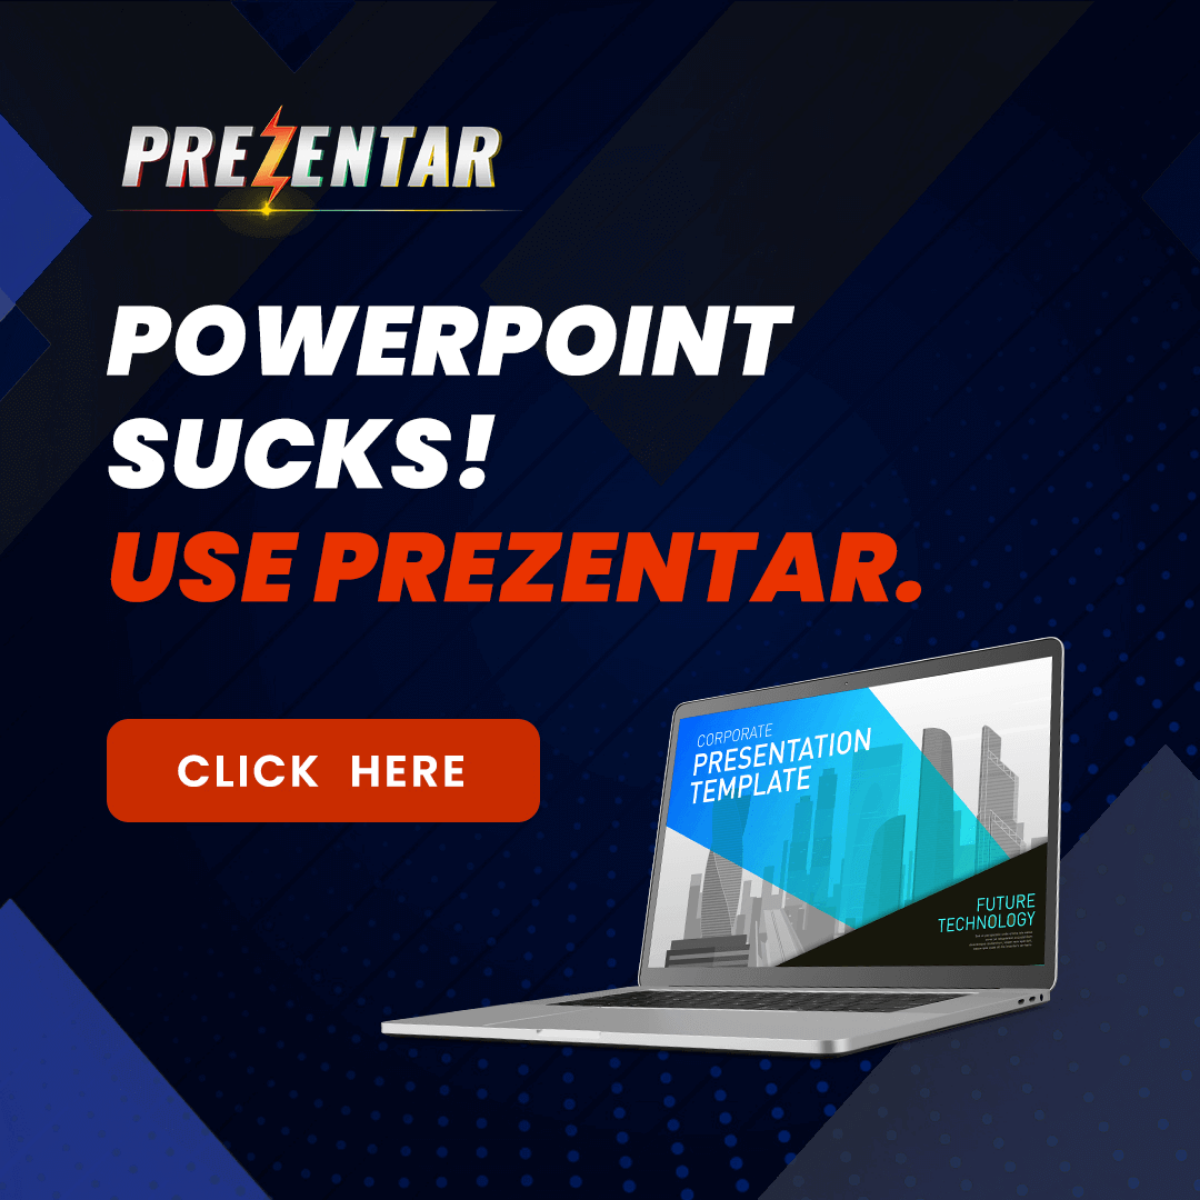 Is Prezentar Worth It? This 2022 In-Depth Review Is A Must-Read Before You Buy